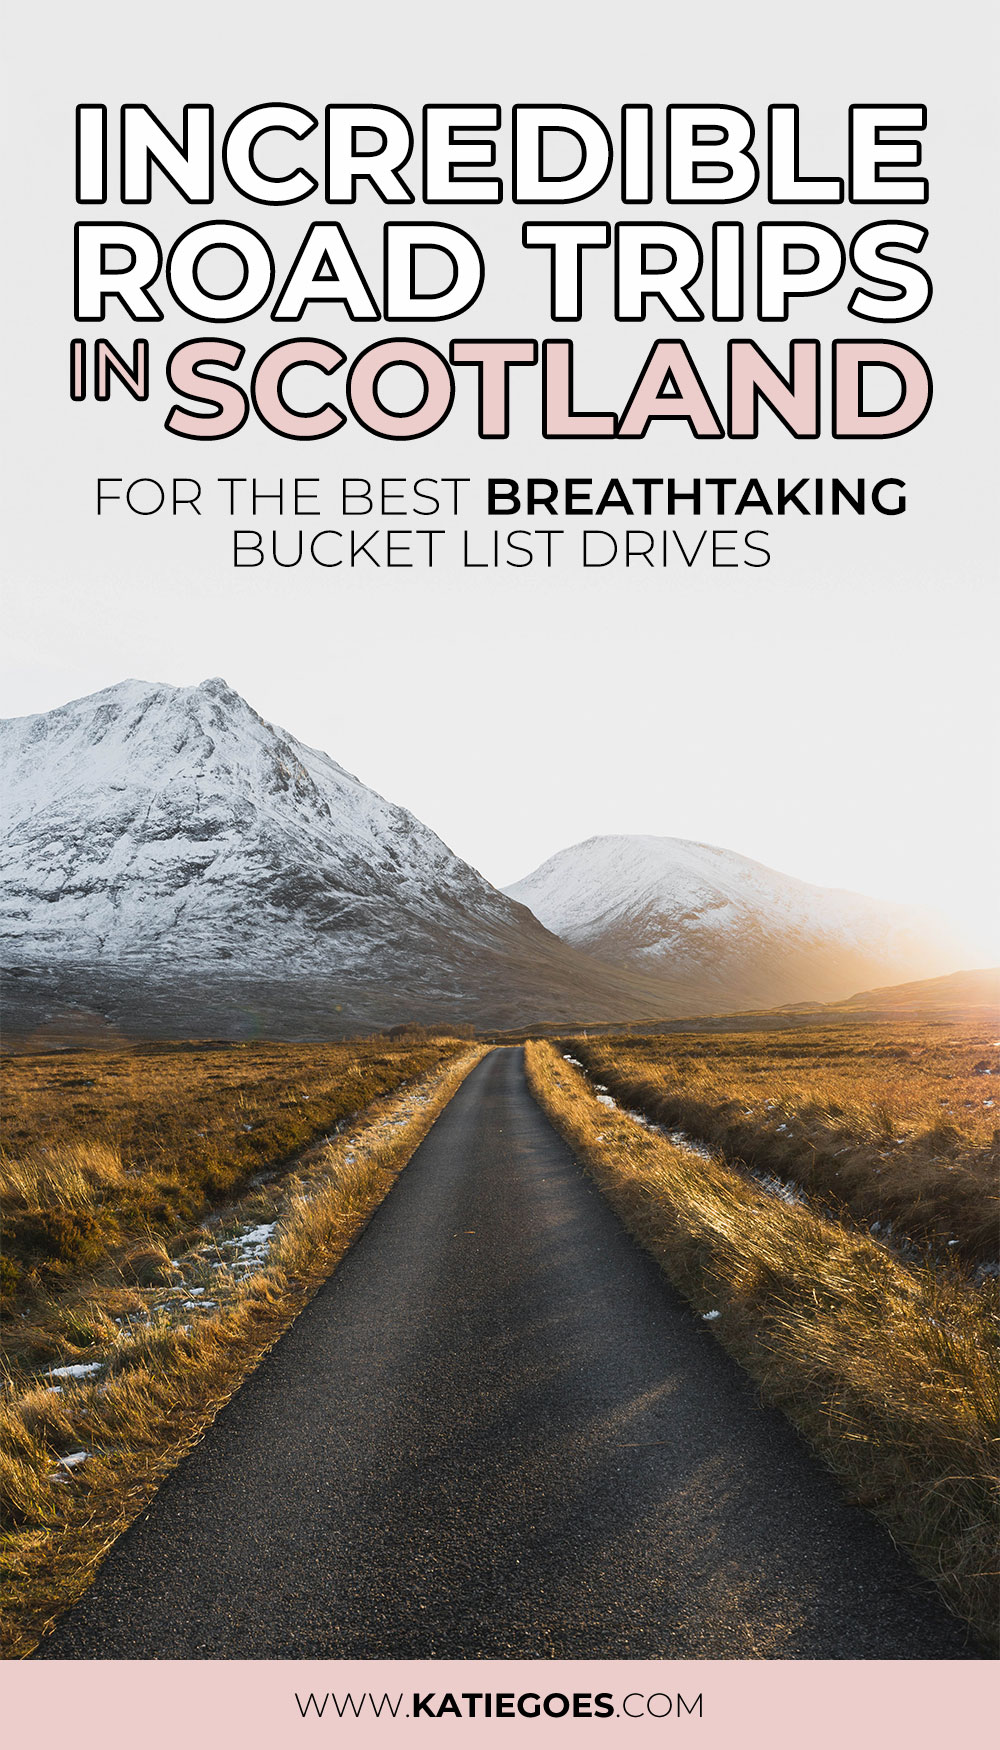 Incredible Road Trips in Scotland for the Best Breathtaking Bucket List Drives